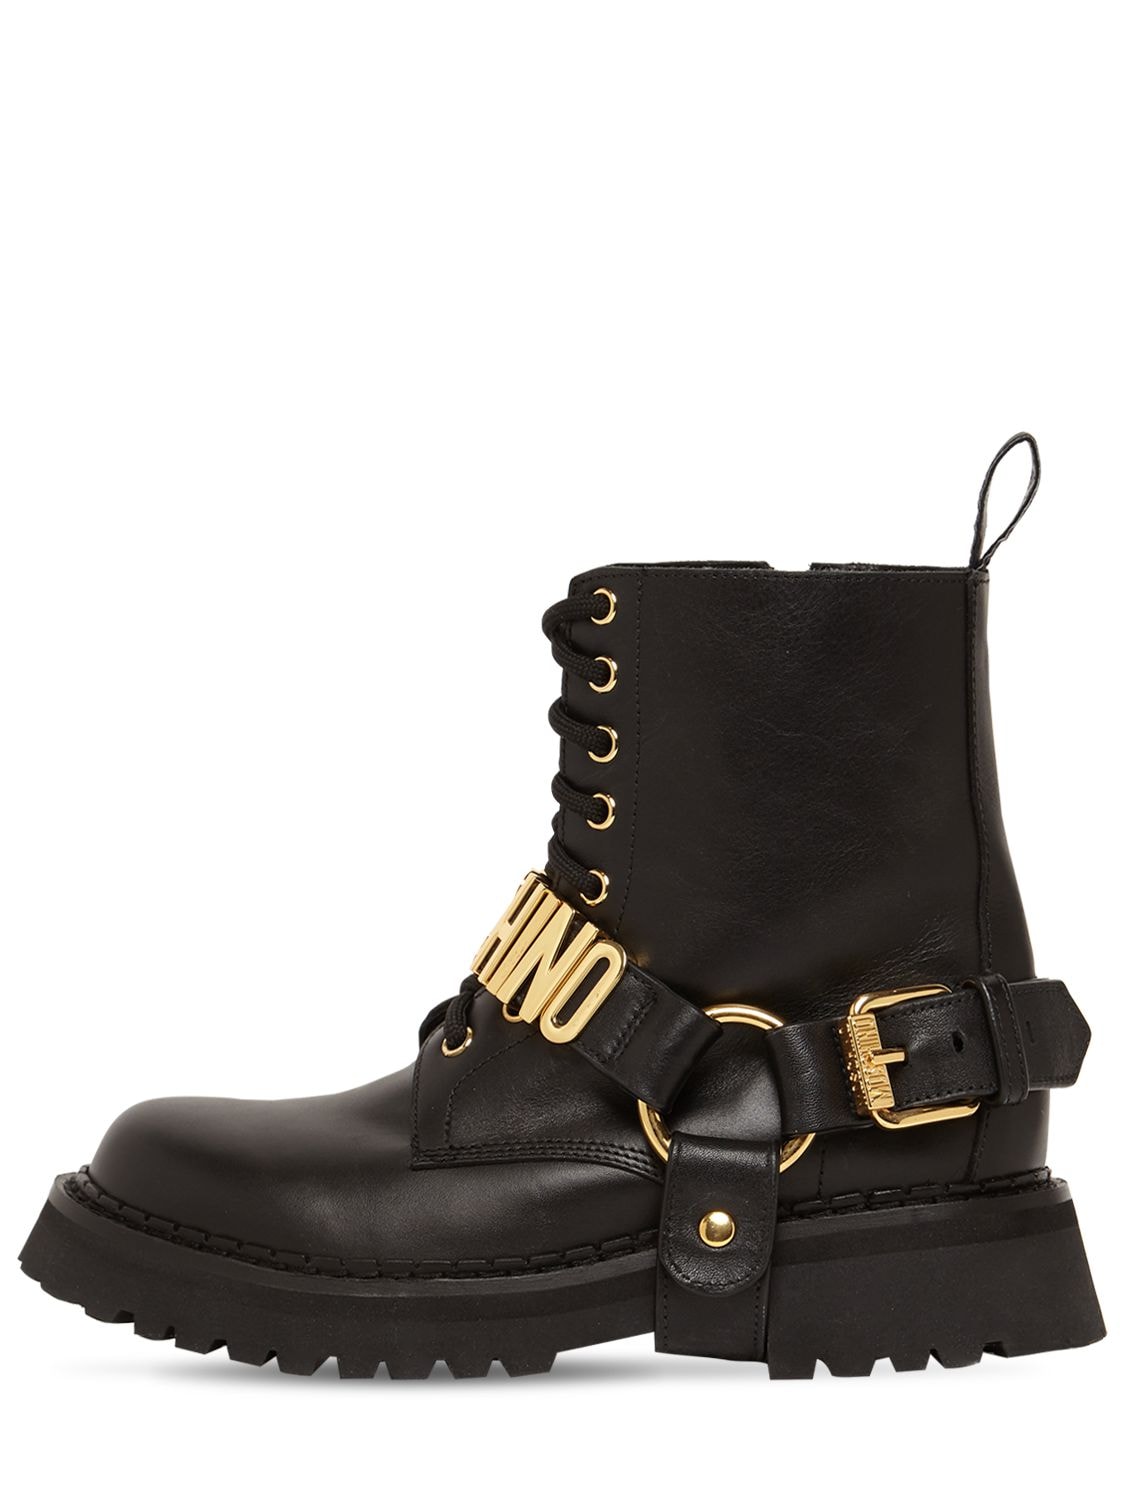 MOSCHINO 50MM LEATHER COMBAT BOOTS,74IAOF009-MDAW0